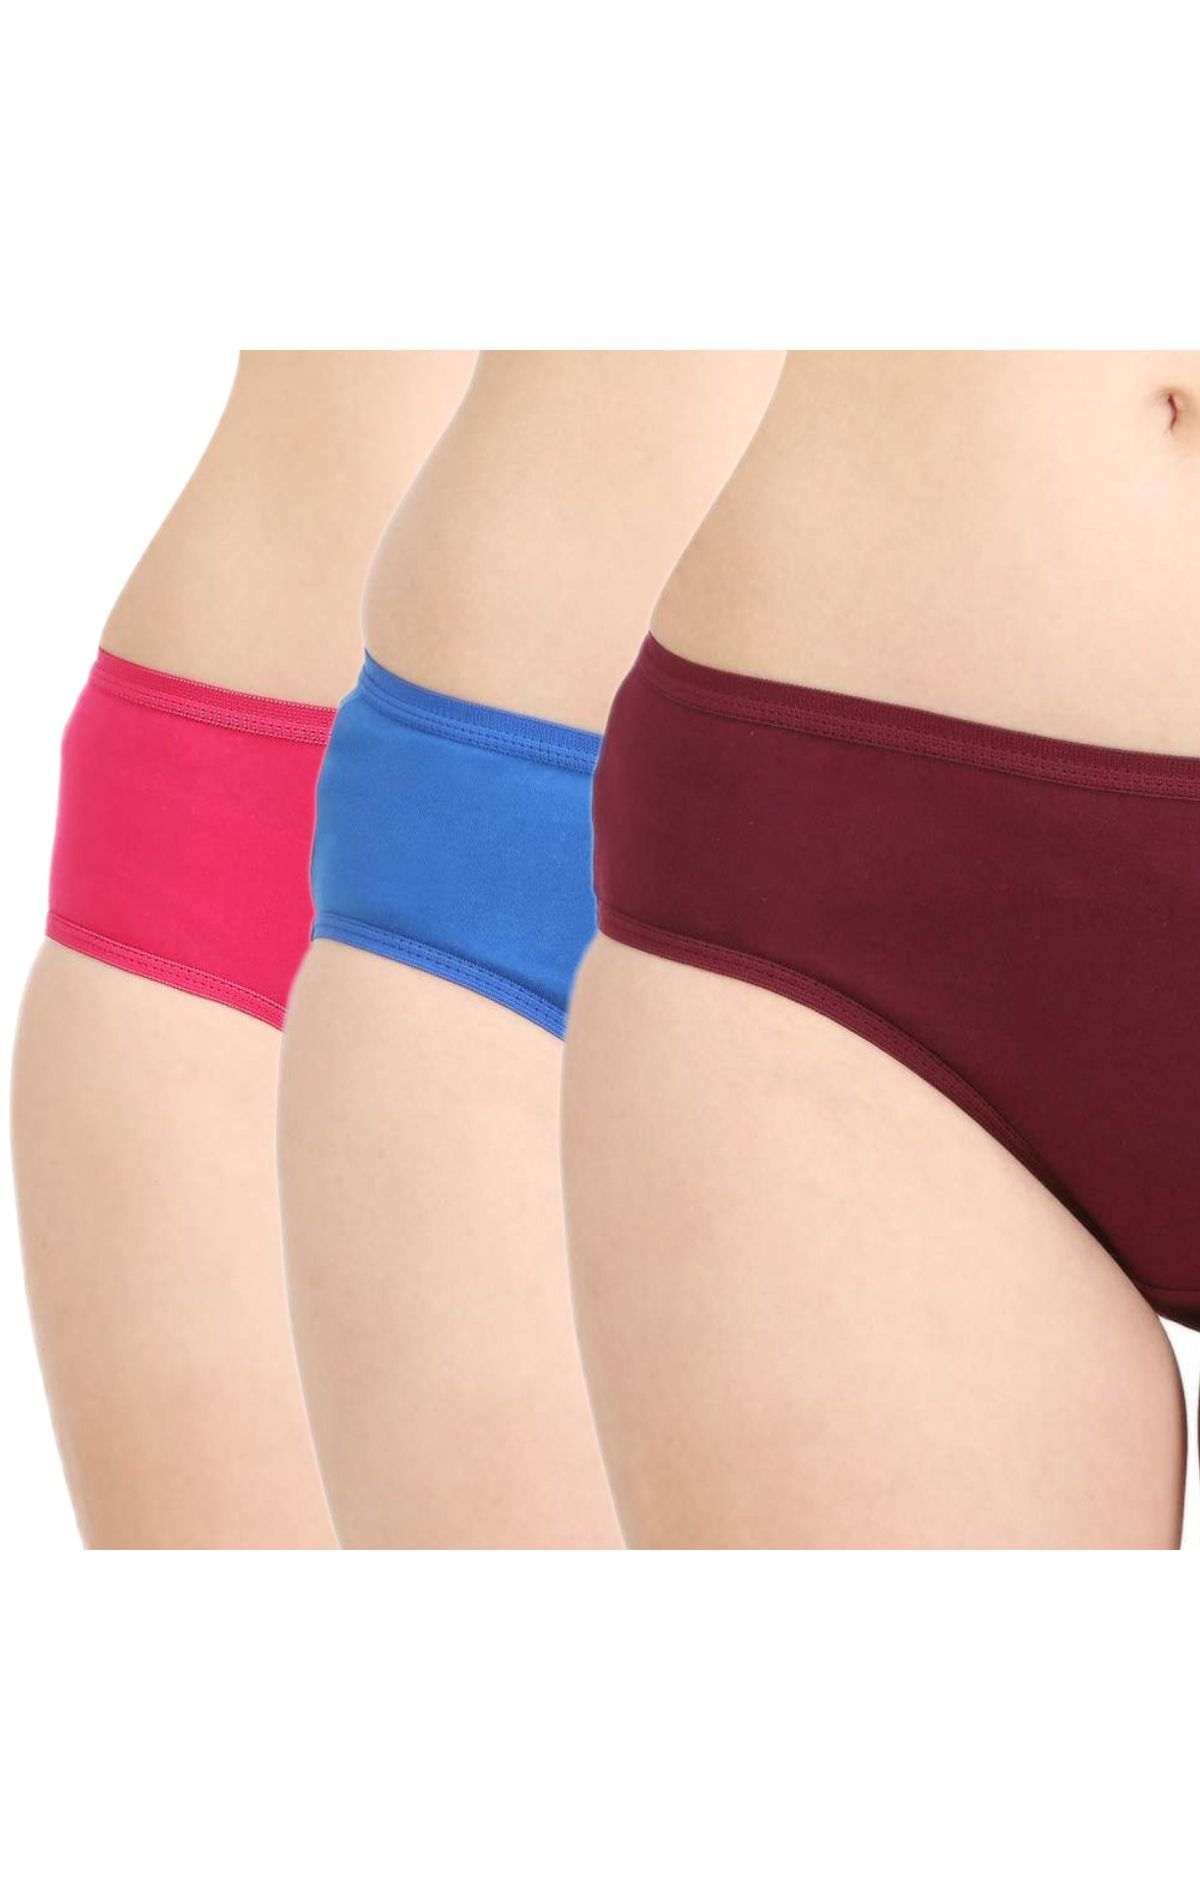 Buy BODYCARE Pack of 6 100% Cotton Classic Panties - Multi-Color Online